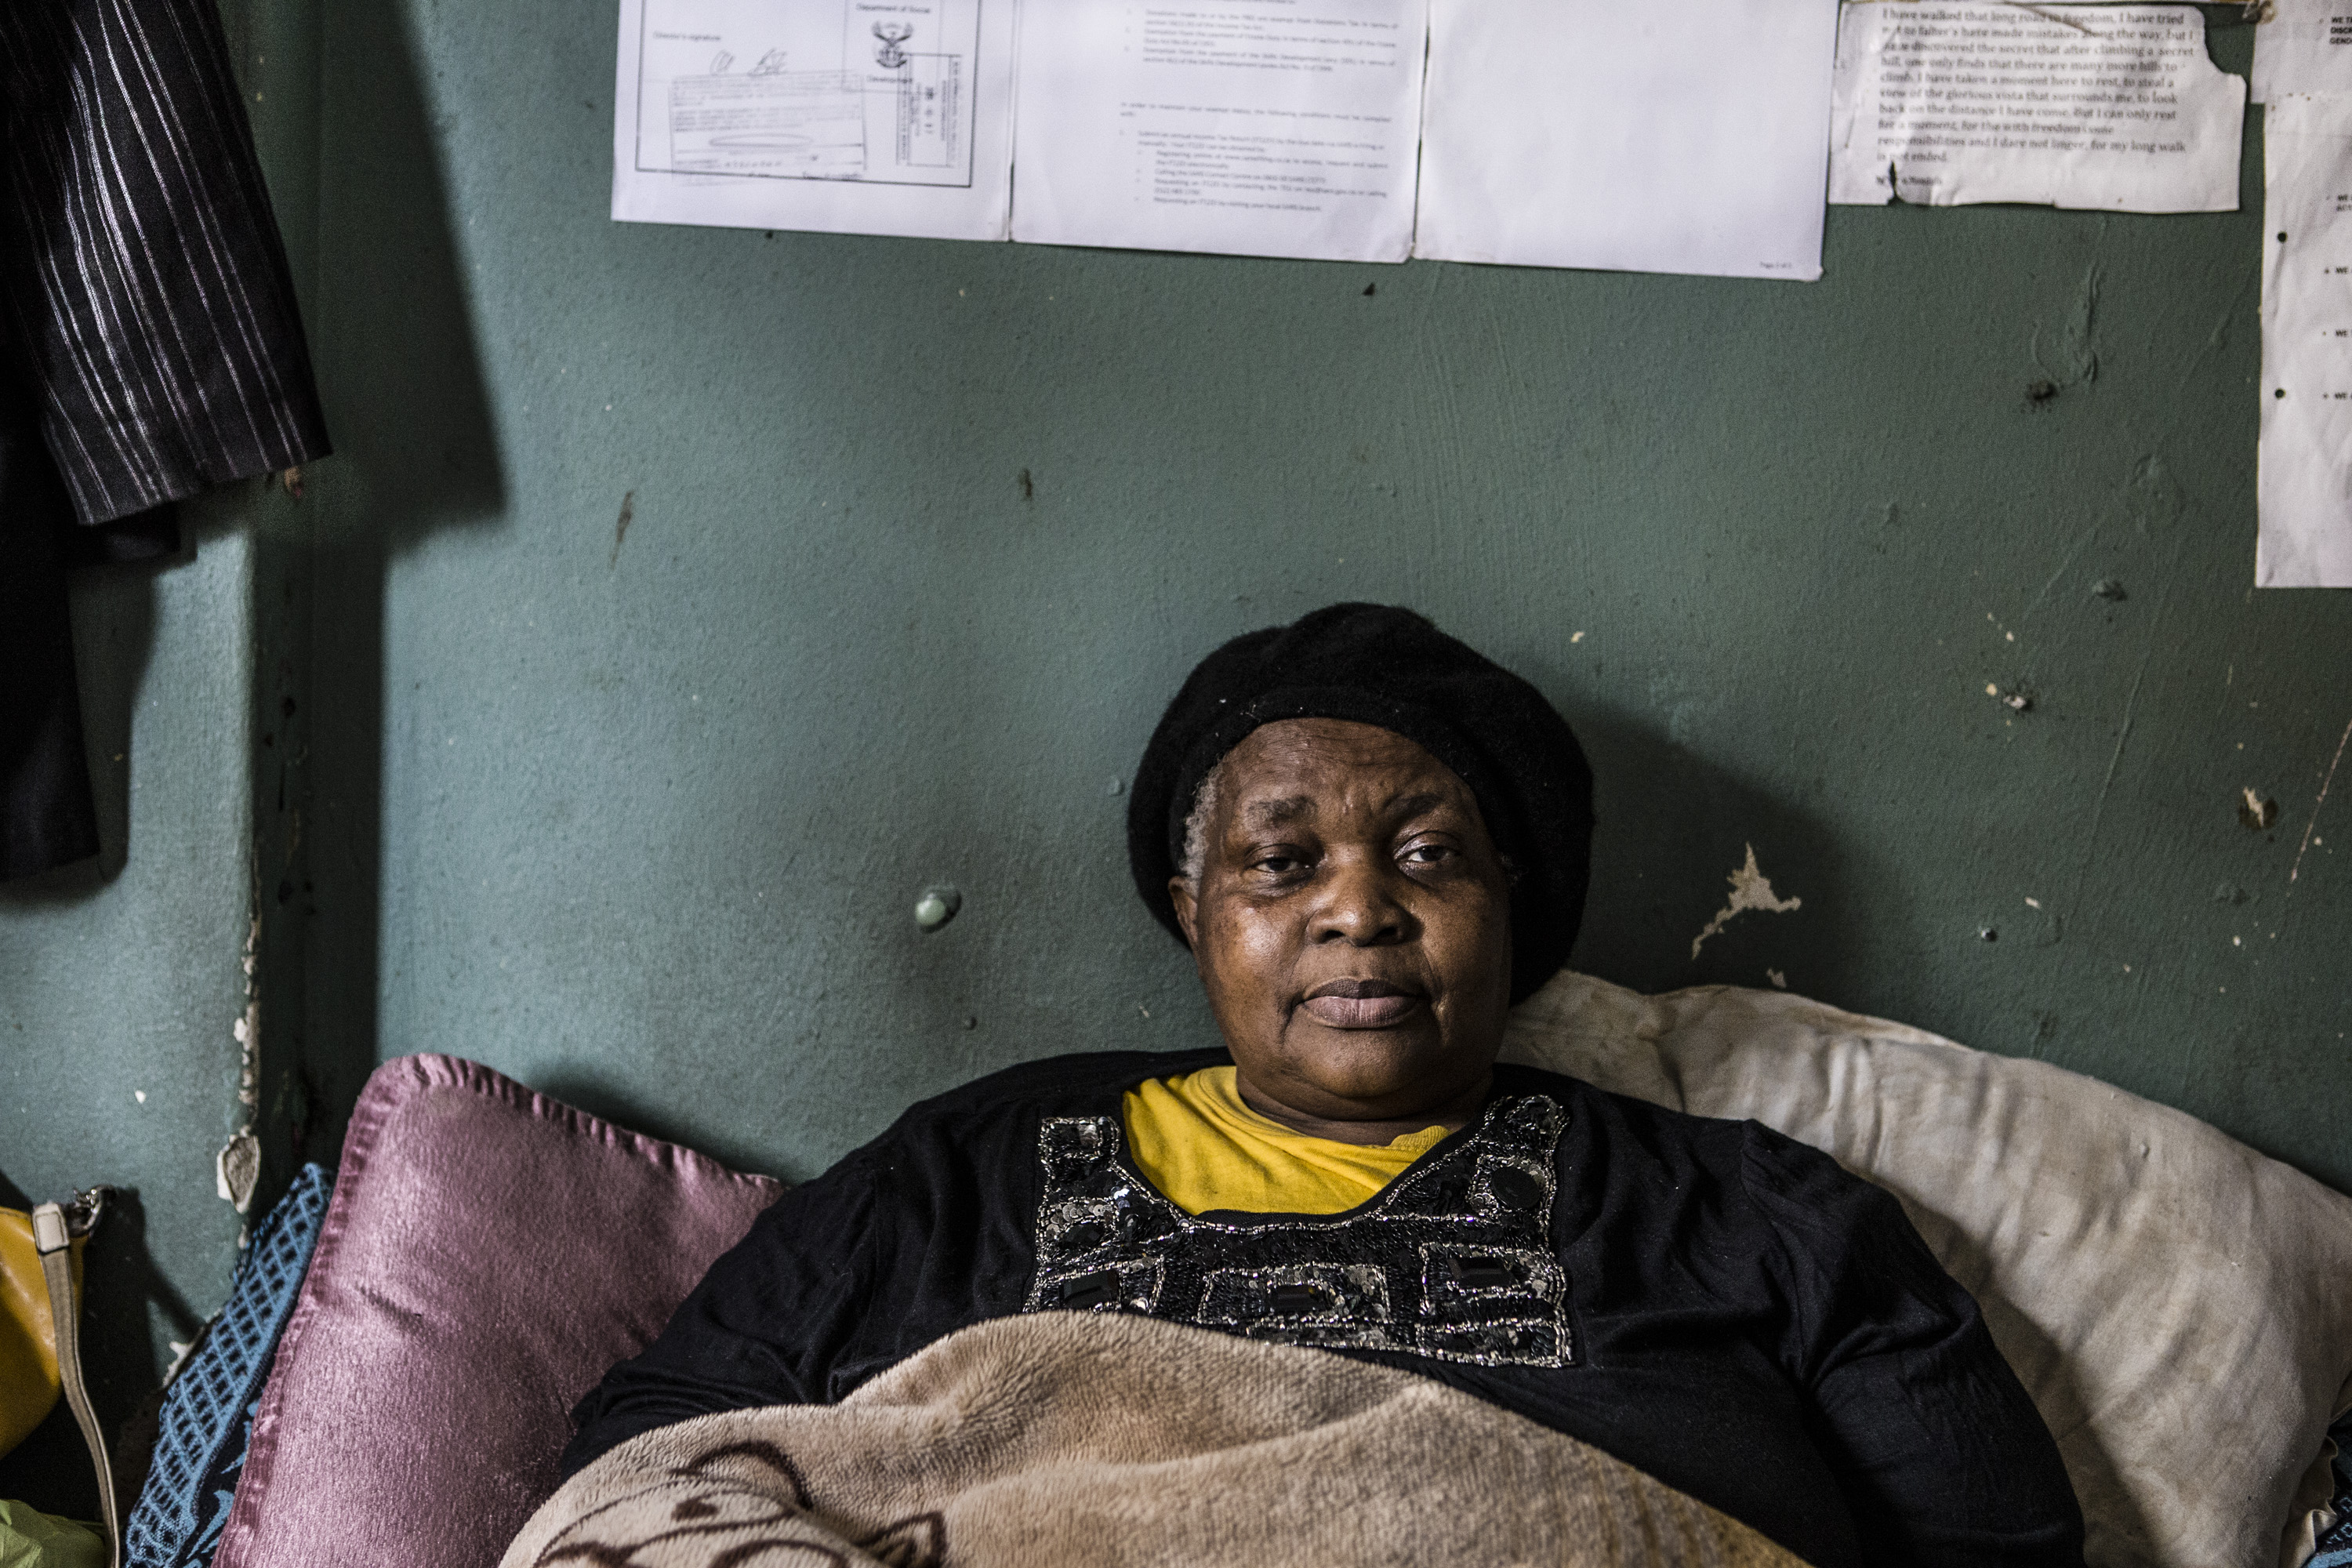 Birthial Gxaleka runs a shelter in a one-bedroom apartment, from 'Wake Up, This Is Joburg'. Image: Mark Lewis